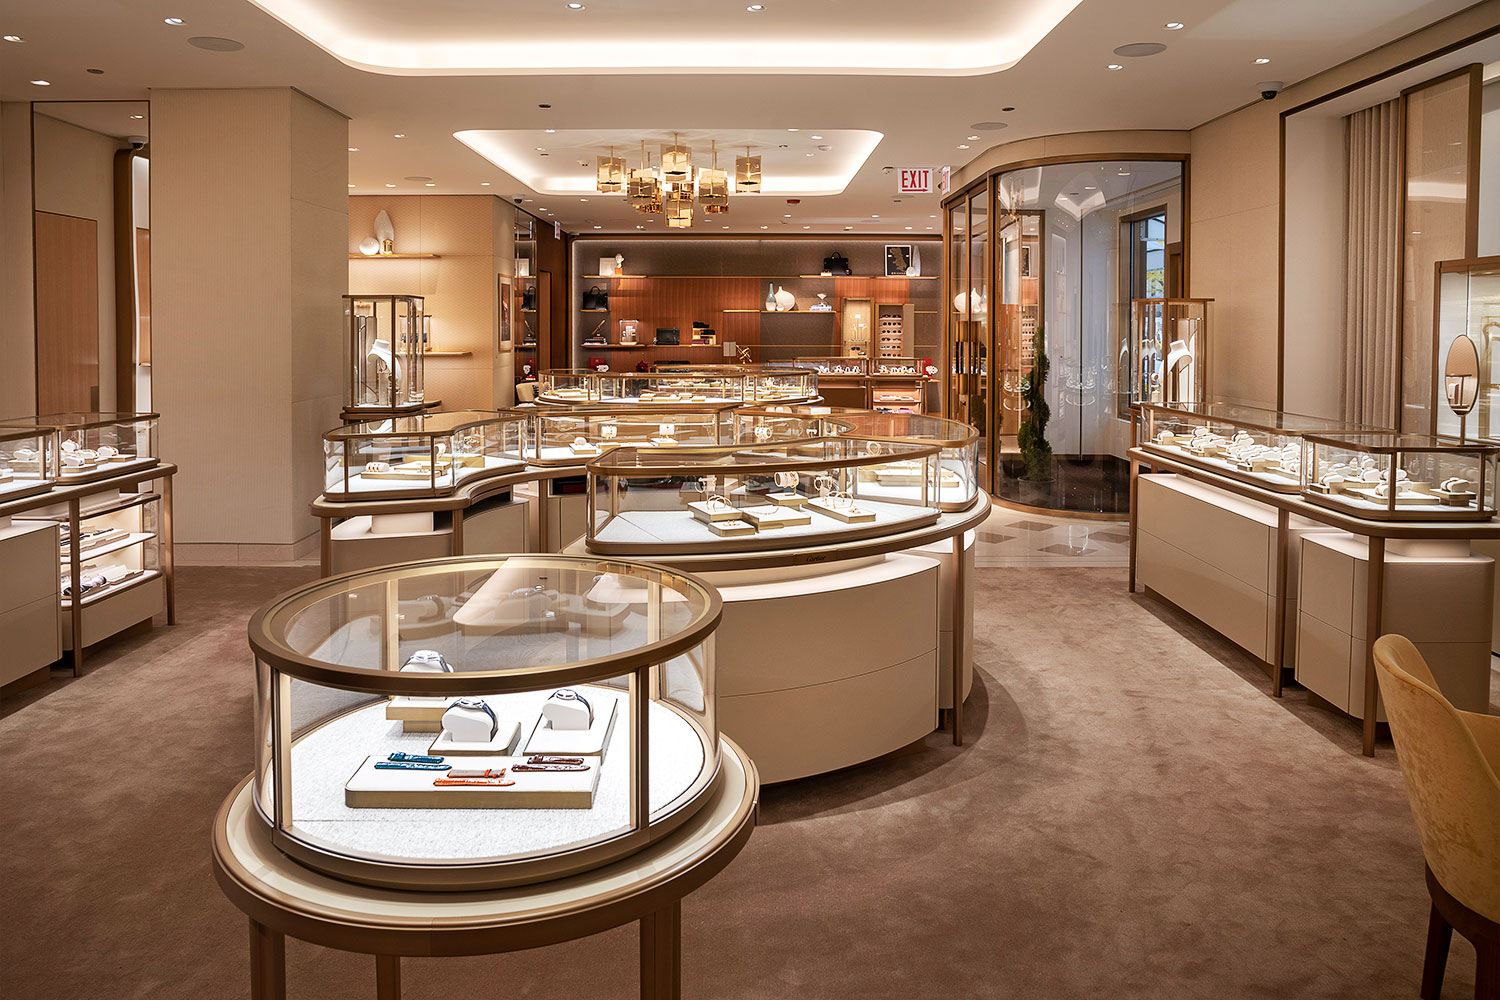 cartier india store